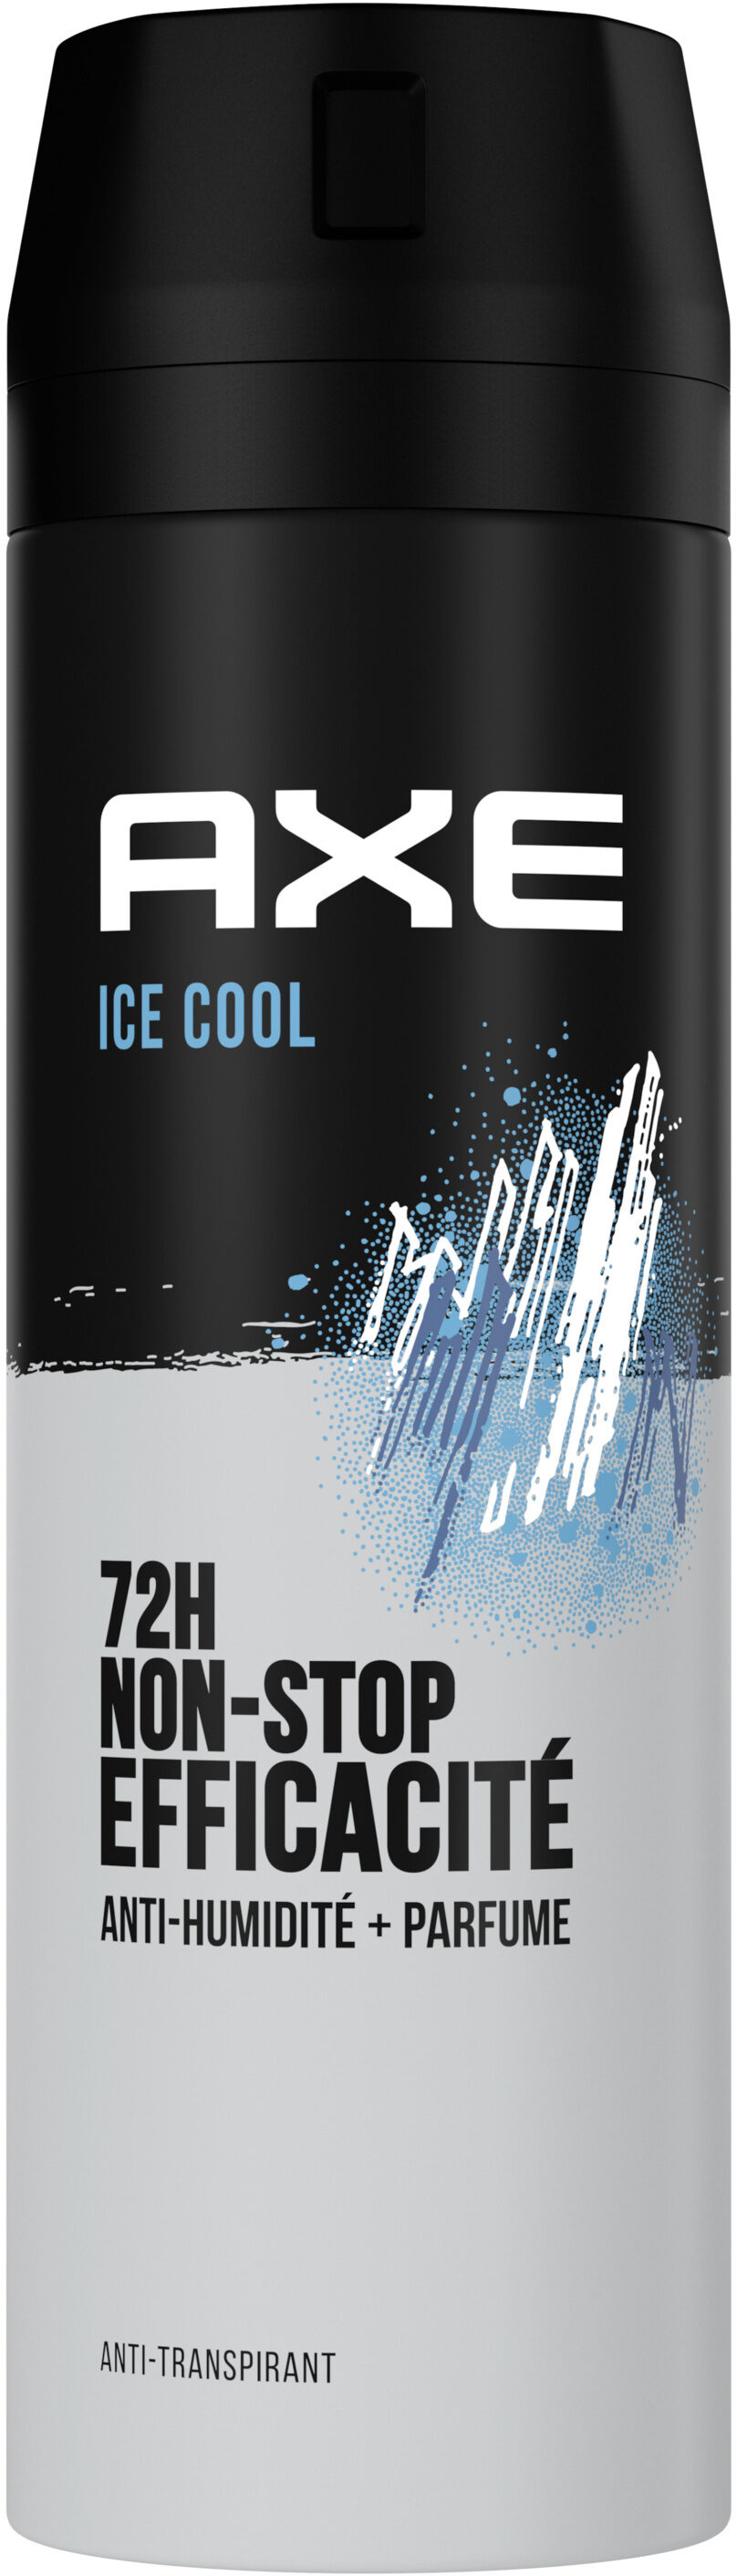 AXE Anti-Transpirant Homme Ice Cool 72h Anti-Humidité 200ml - Product - fr